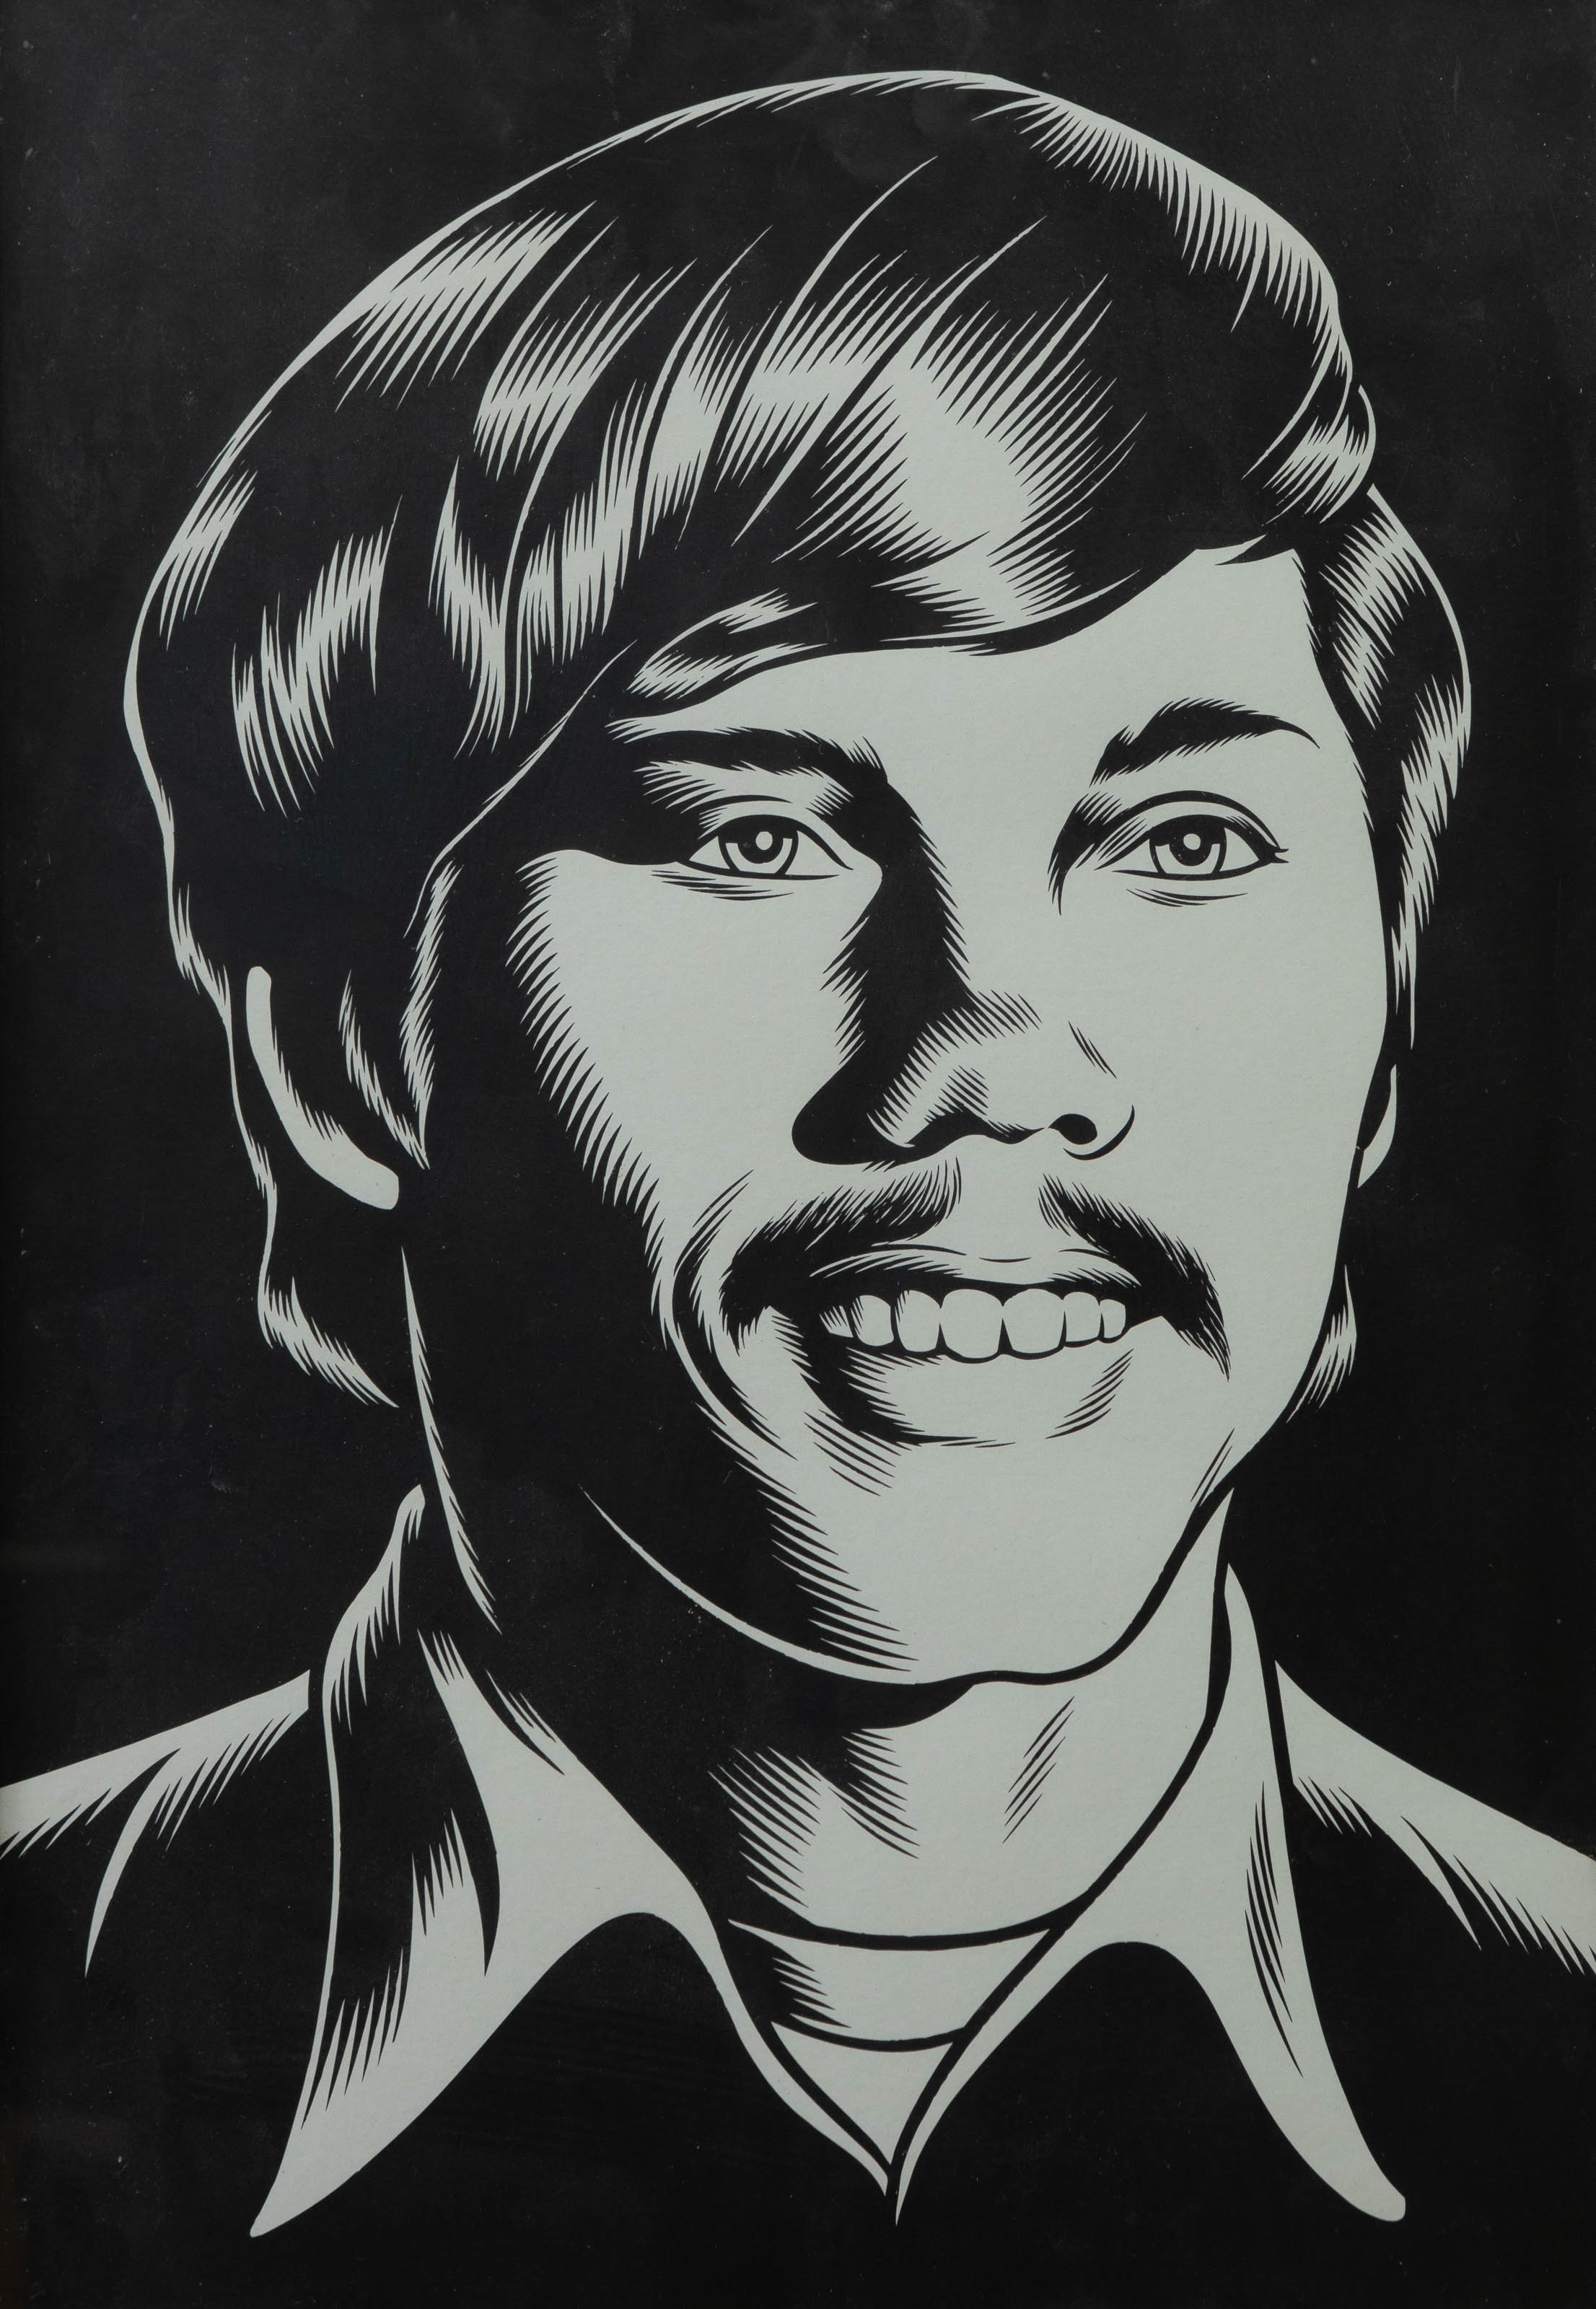 Artwork by Charles Burns, Untitled, Made of Silkscreen